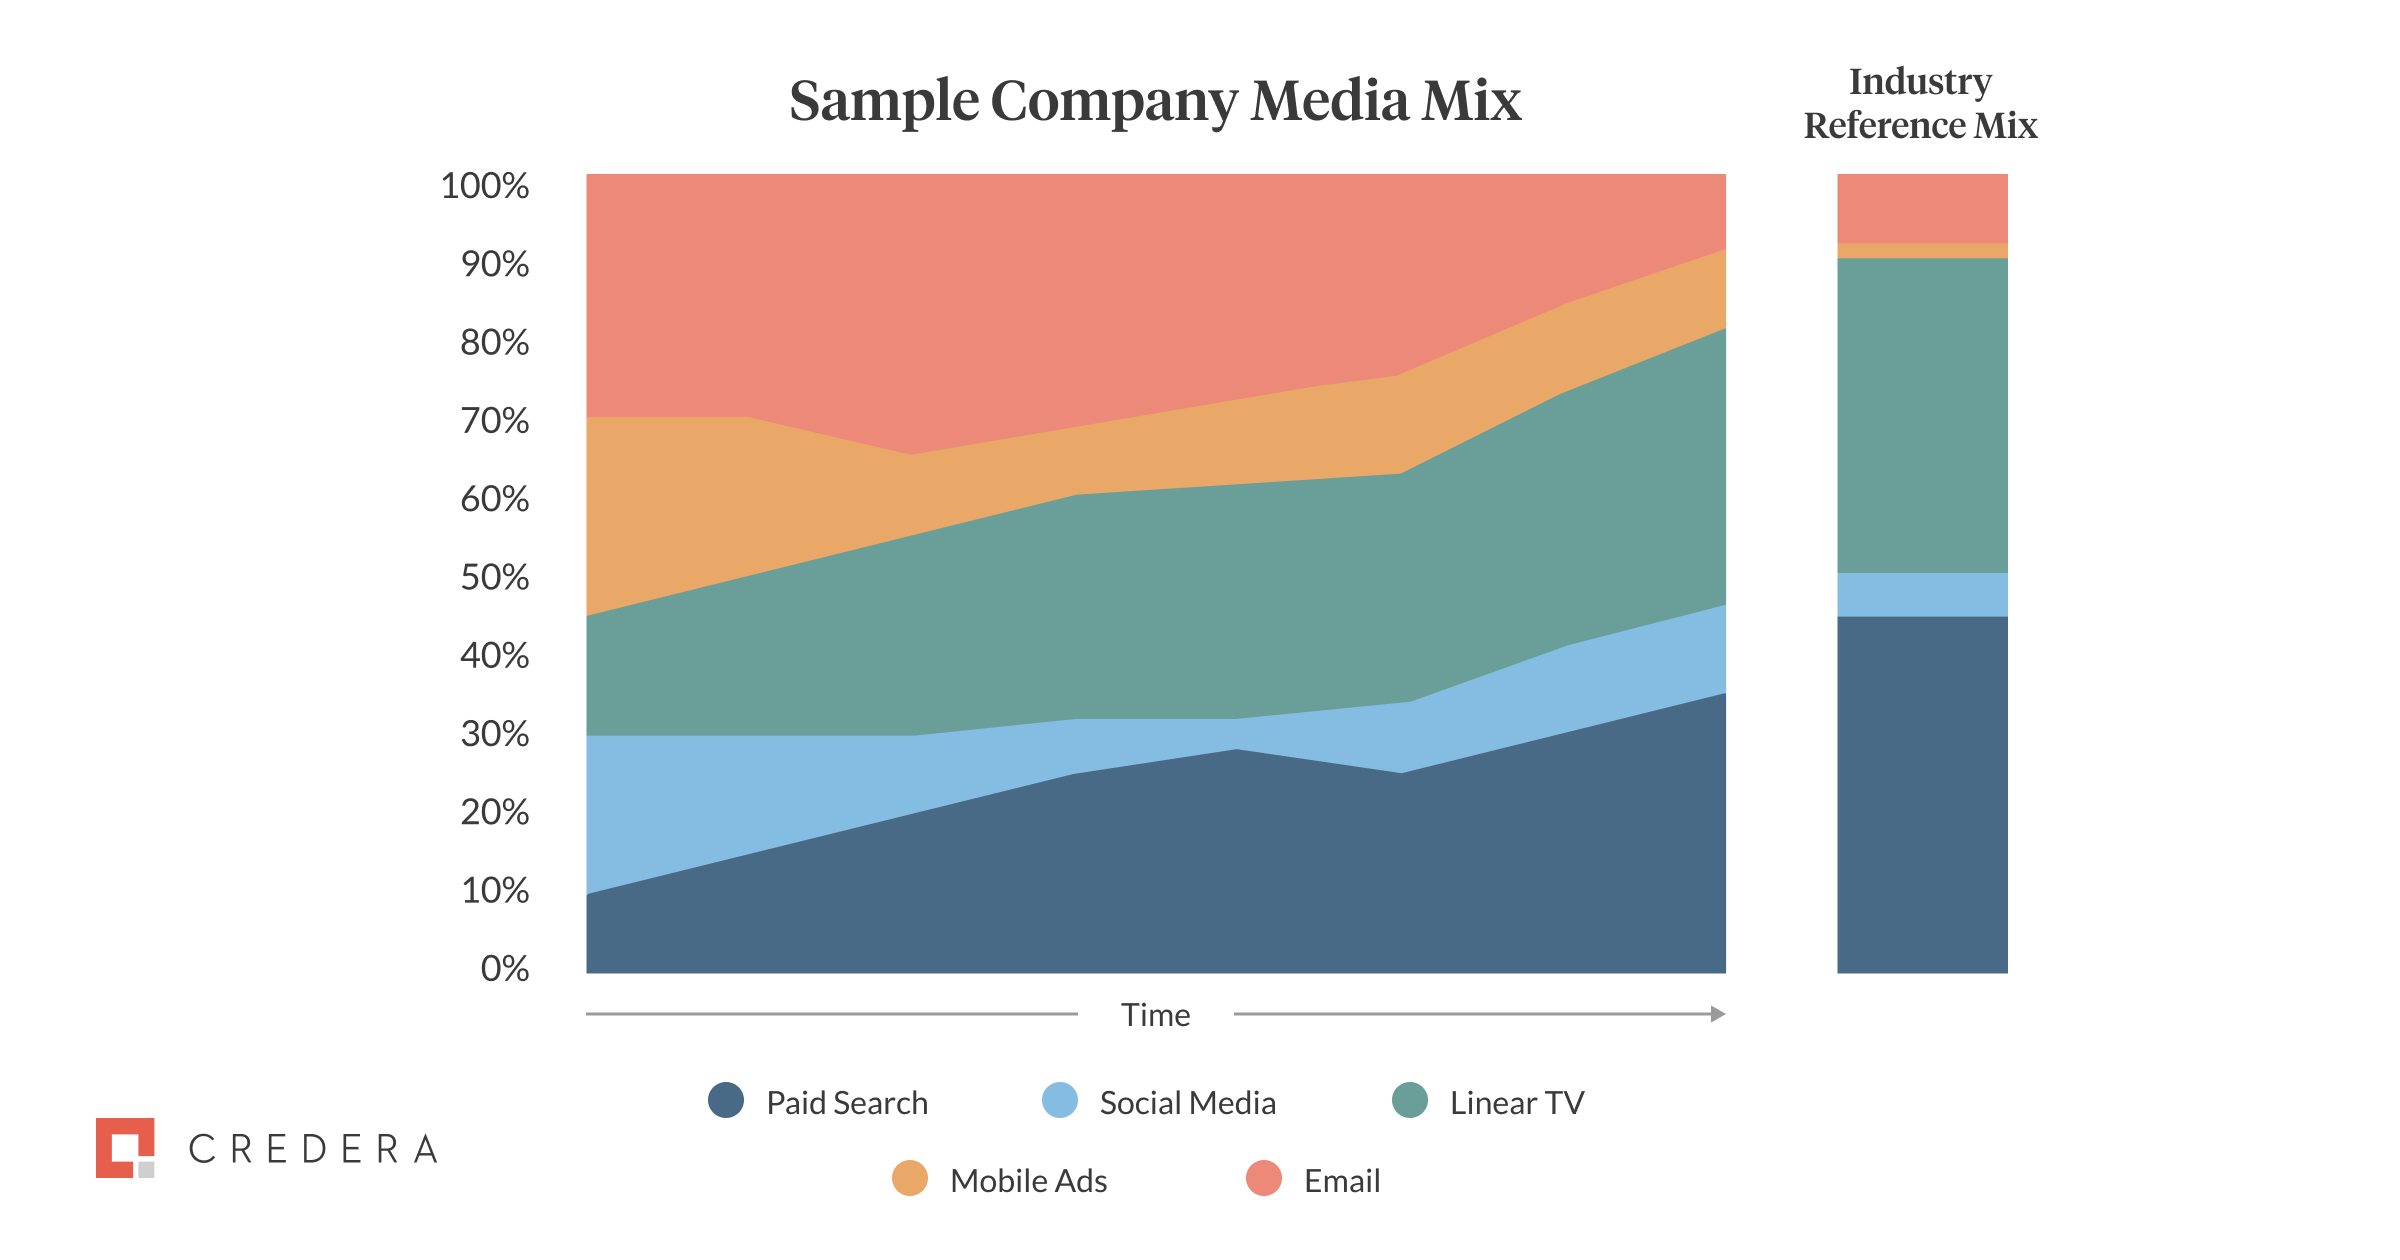 Figure 1: A sample company media mix over time compared to a current data clean room reference. Note the disparities between various categories in the sample media mix and the reference that could be realigned to optimize return on ad spend.